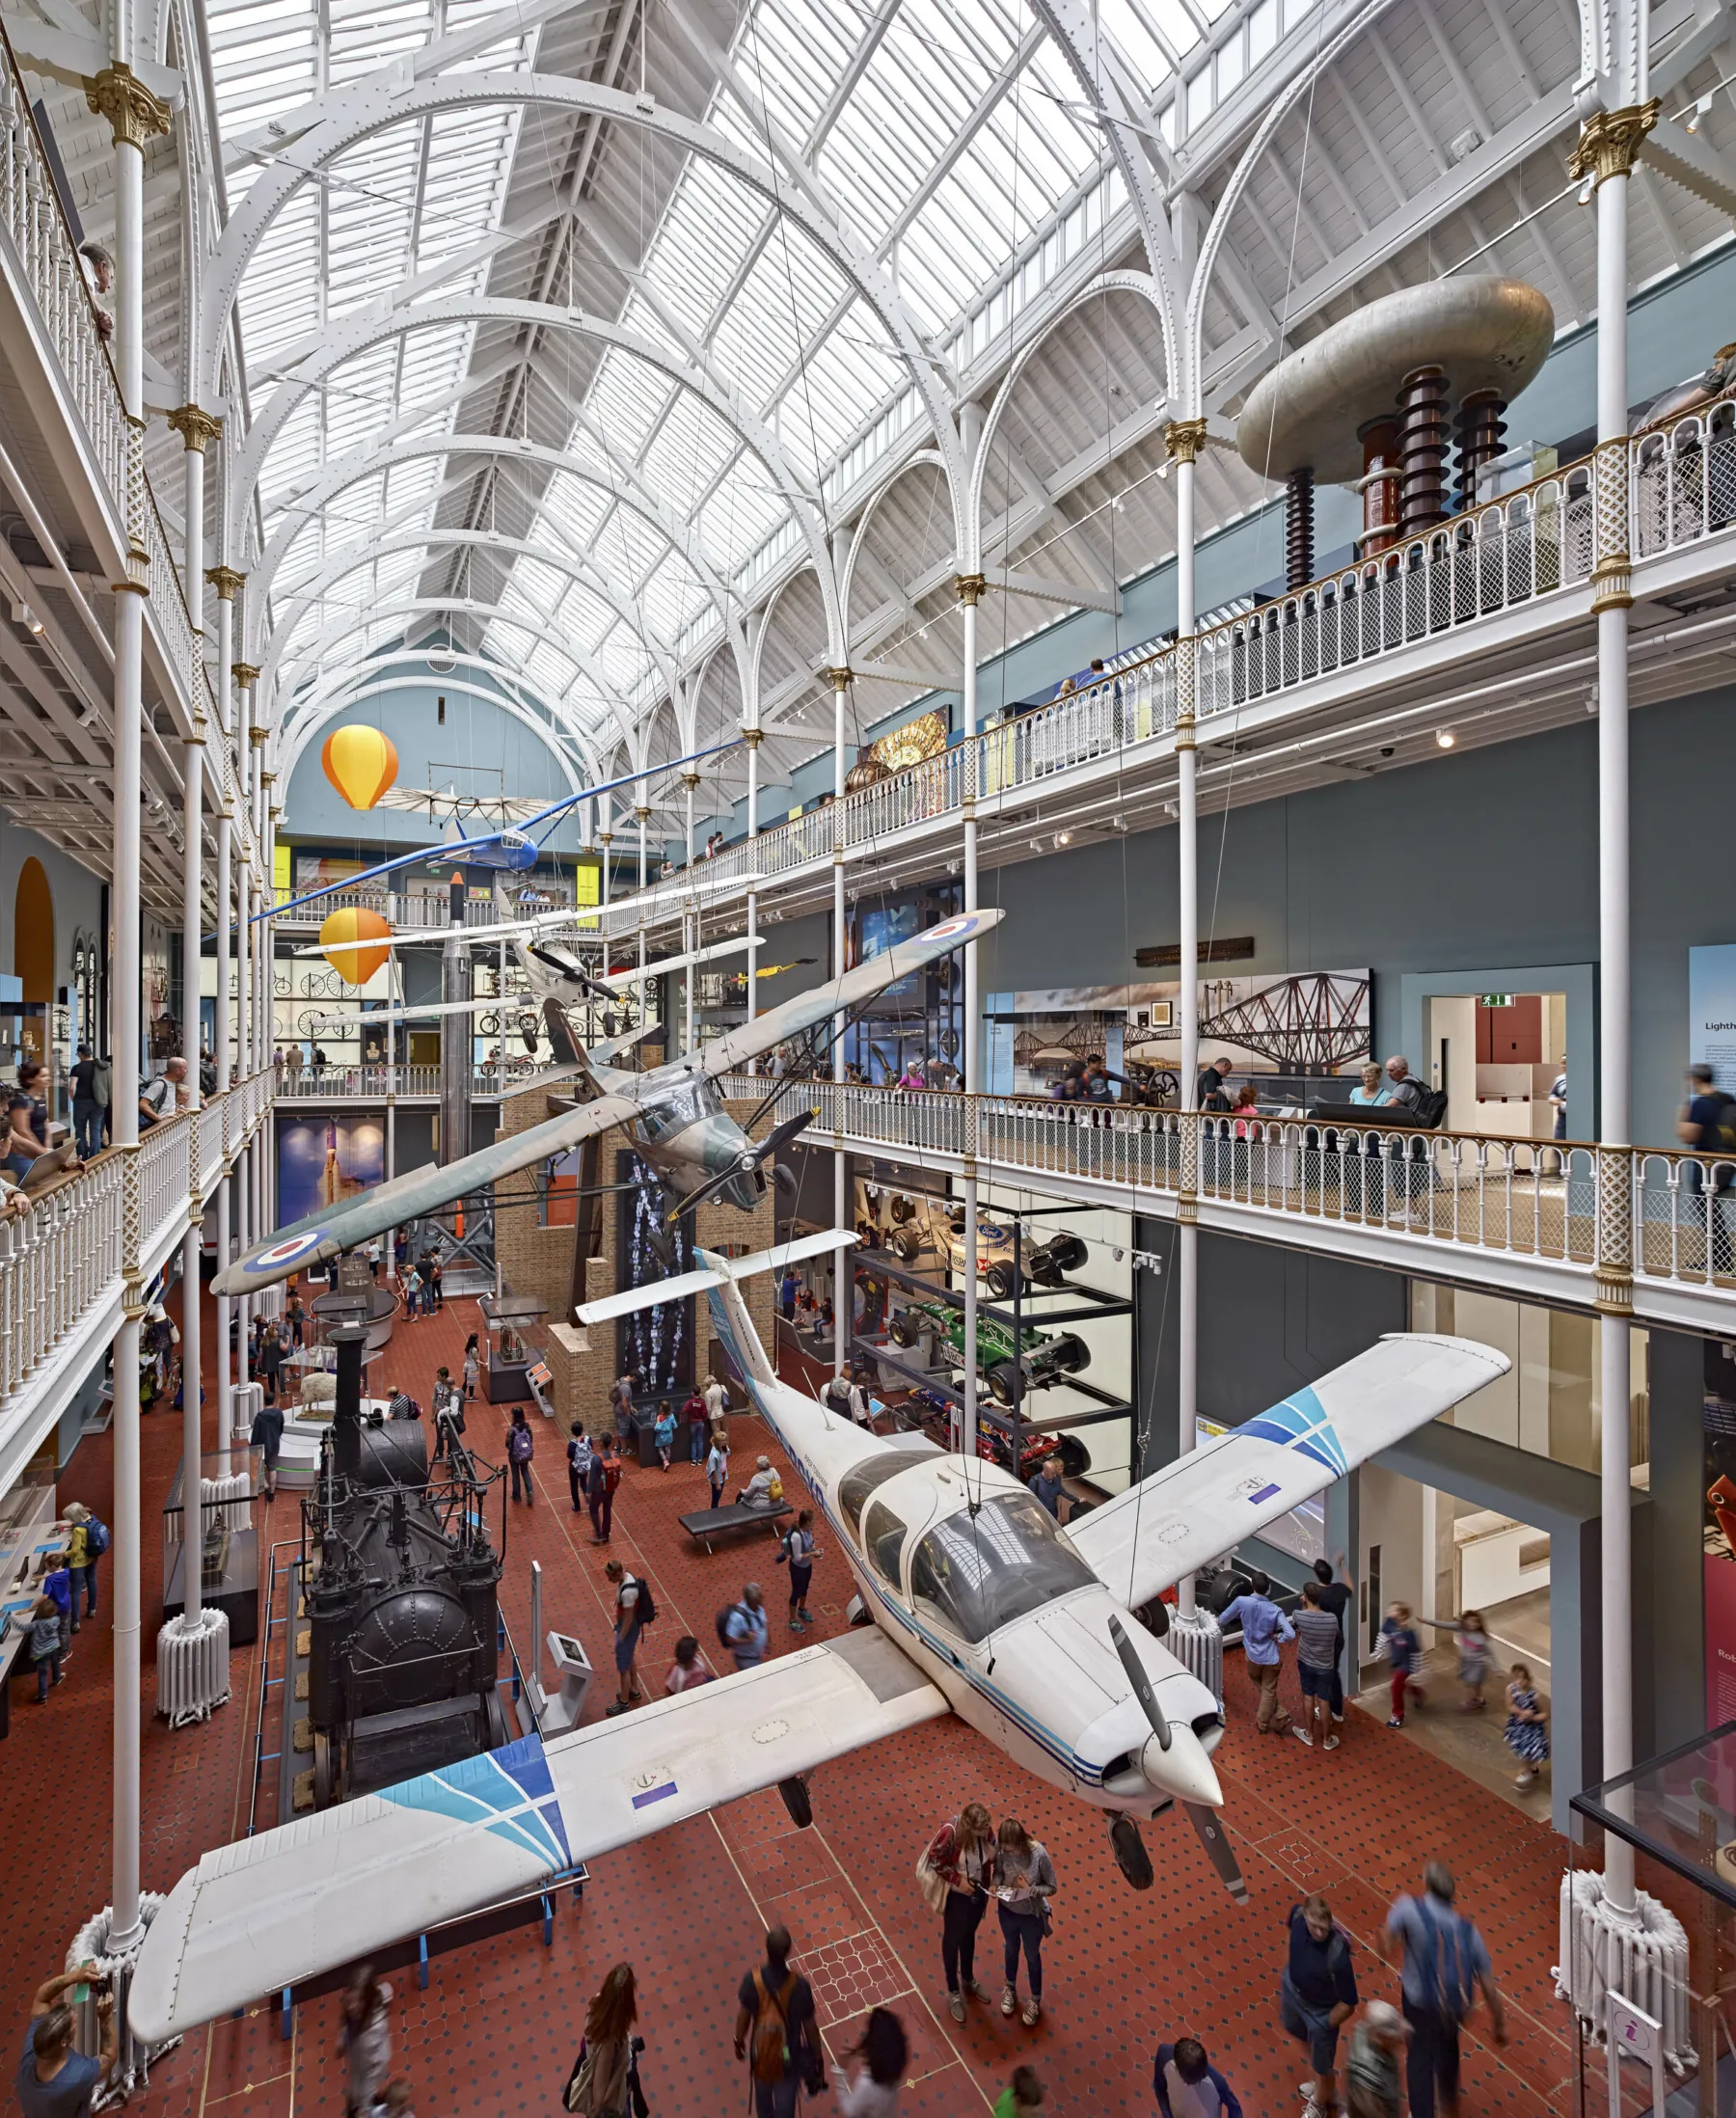 Inside the National Museum of Scotland Science and Technology Galleries on Chamber Street, Edinburgh. A large victorian hall with three storeys, galleries around the main atrium, wrought iron pillars and a glazed ceiling. Small aircraft hang into the space, suspended from the rafters. Visitors mill around all the spaces.